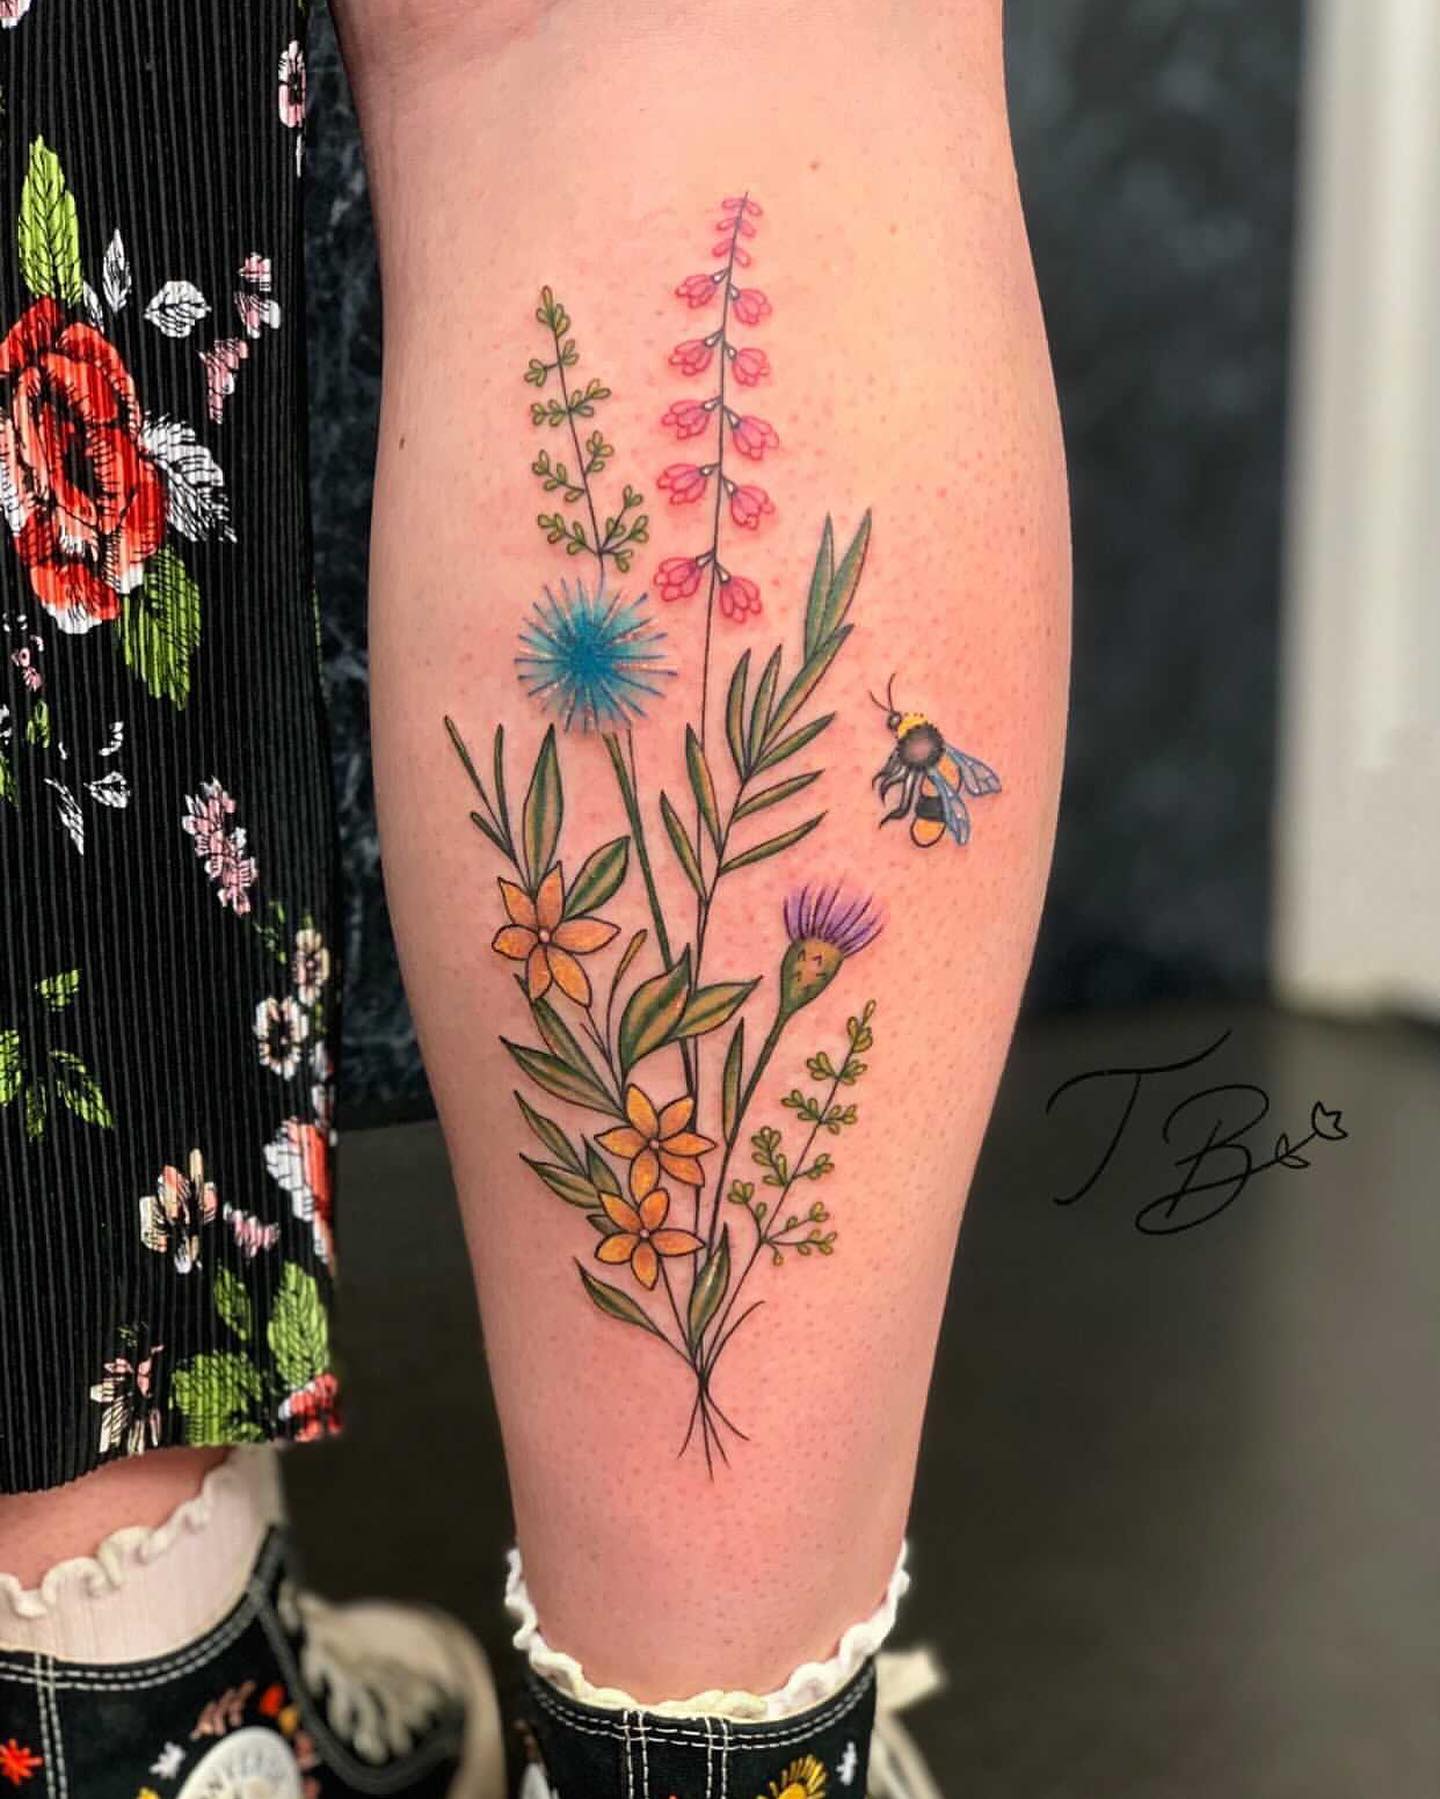 Thank you so much Chloe for trusting me with such a fun project! 🌸🌼
•
Done at studioxiiigallery 
•

                    